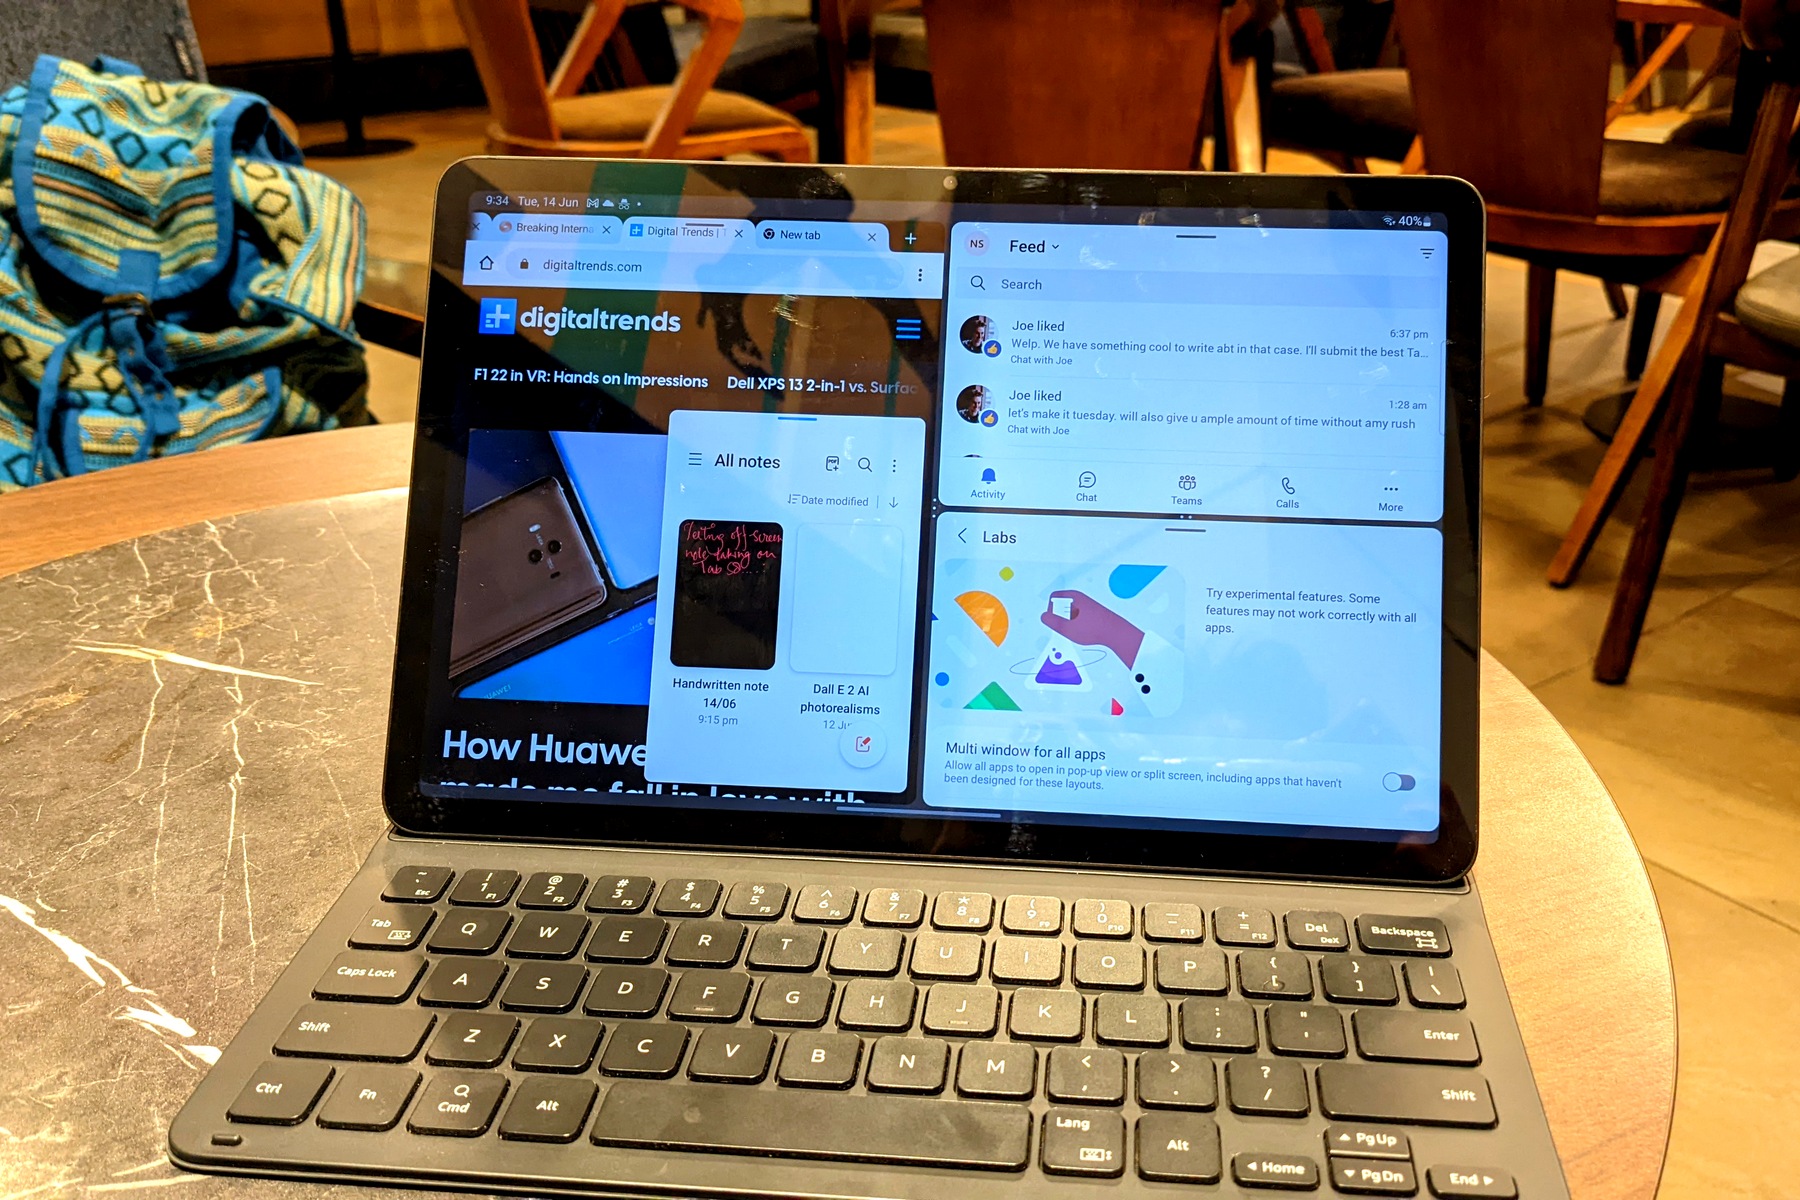 Samsung Galaxy Tab S8 and S8 Plus hands-on: A potent pair